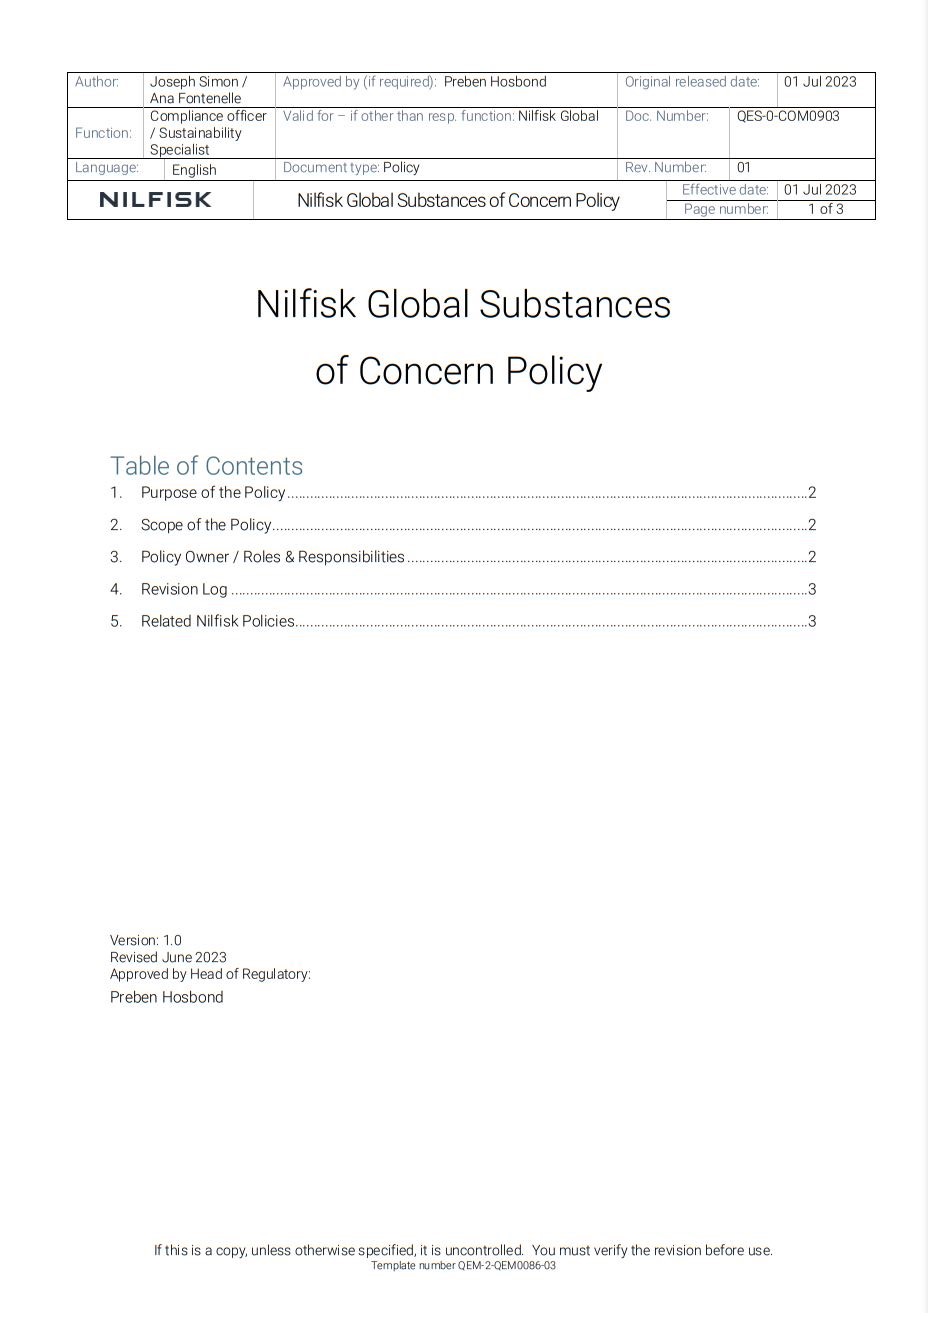 Substances Of Concern Policy